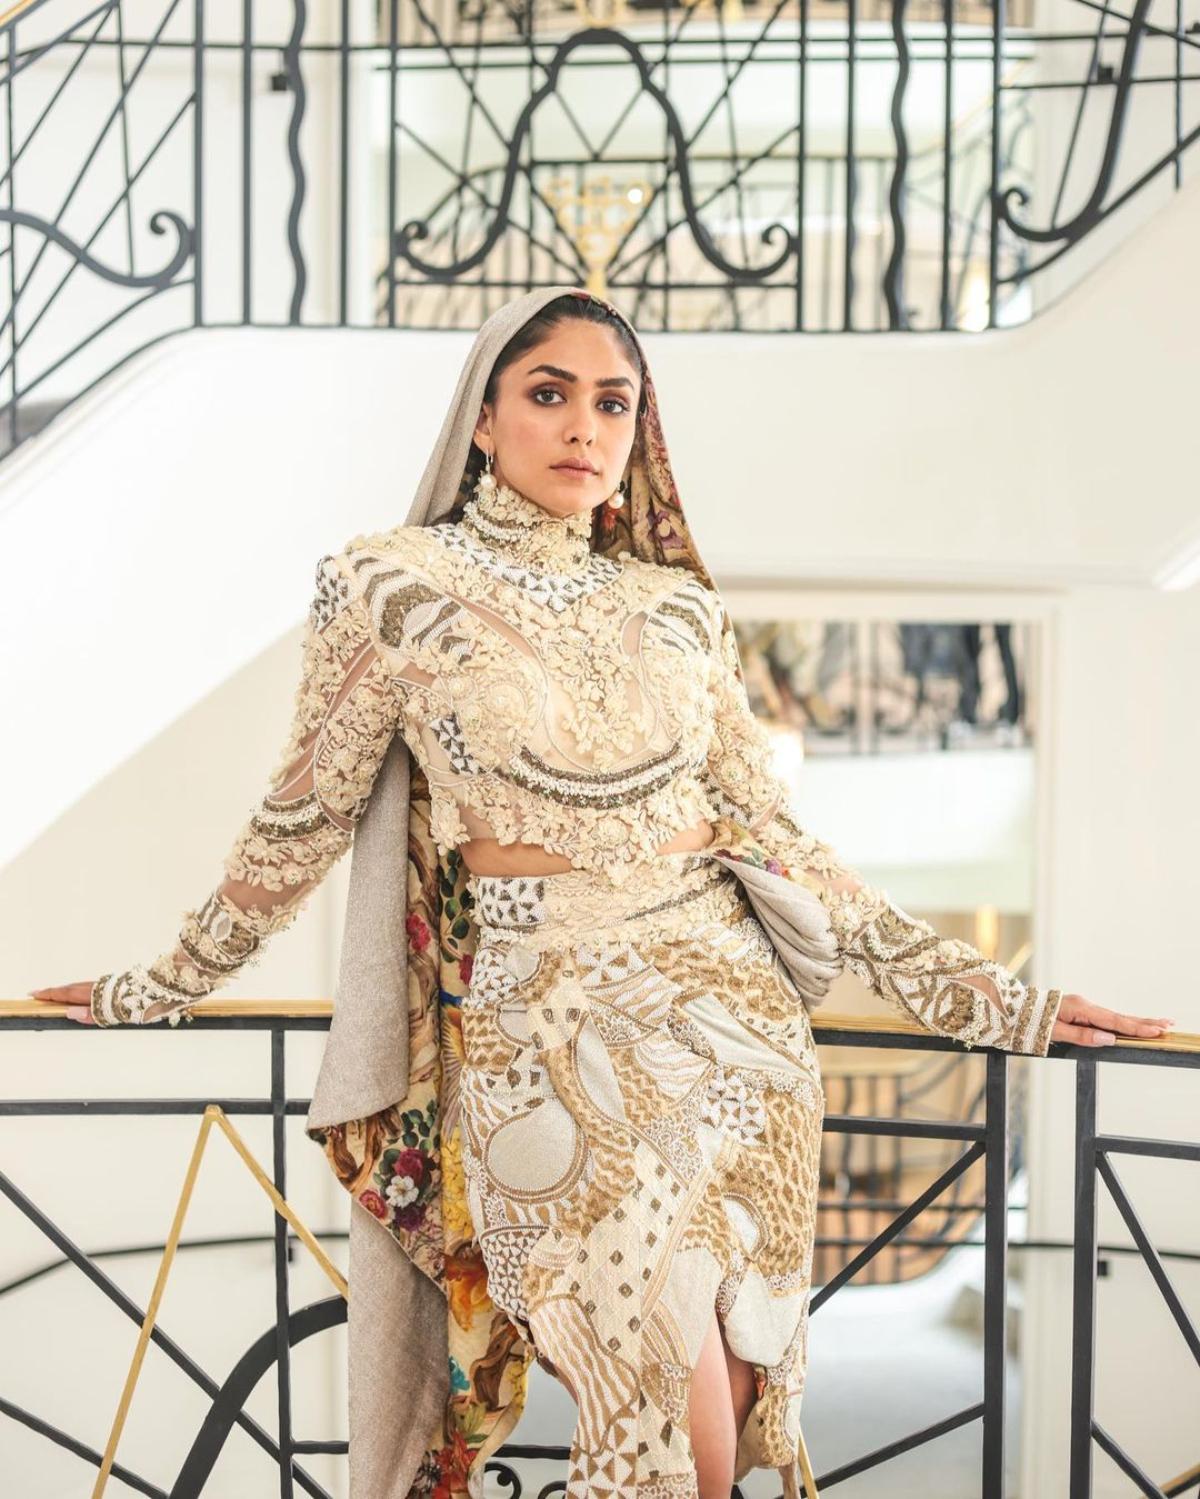 For her second red carpet appearance at Cannes Film Festival, the 'Sita Ramam' star took her fashion game a notch higher as she sported a beige hooded couture short dress and spilled her infectious sass all over as she walked the red carpet in matching high heels like an absolute boss babe. 